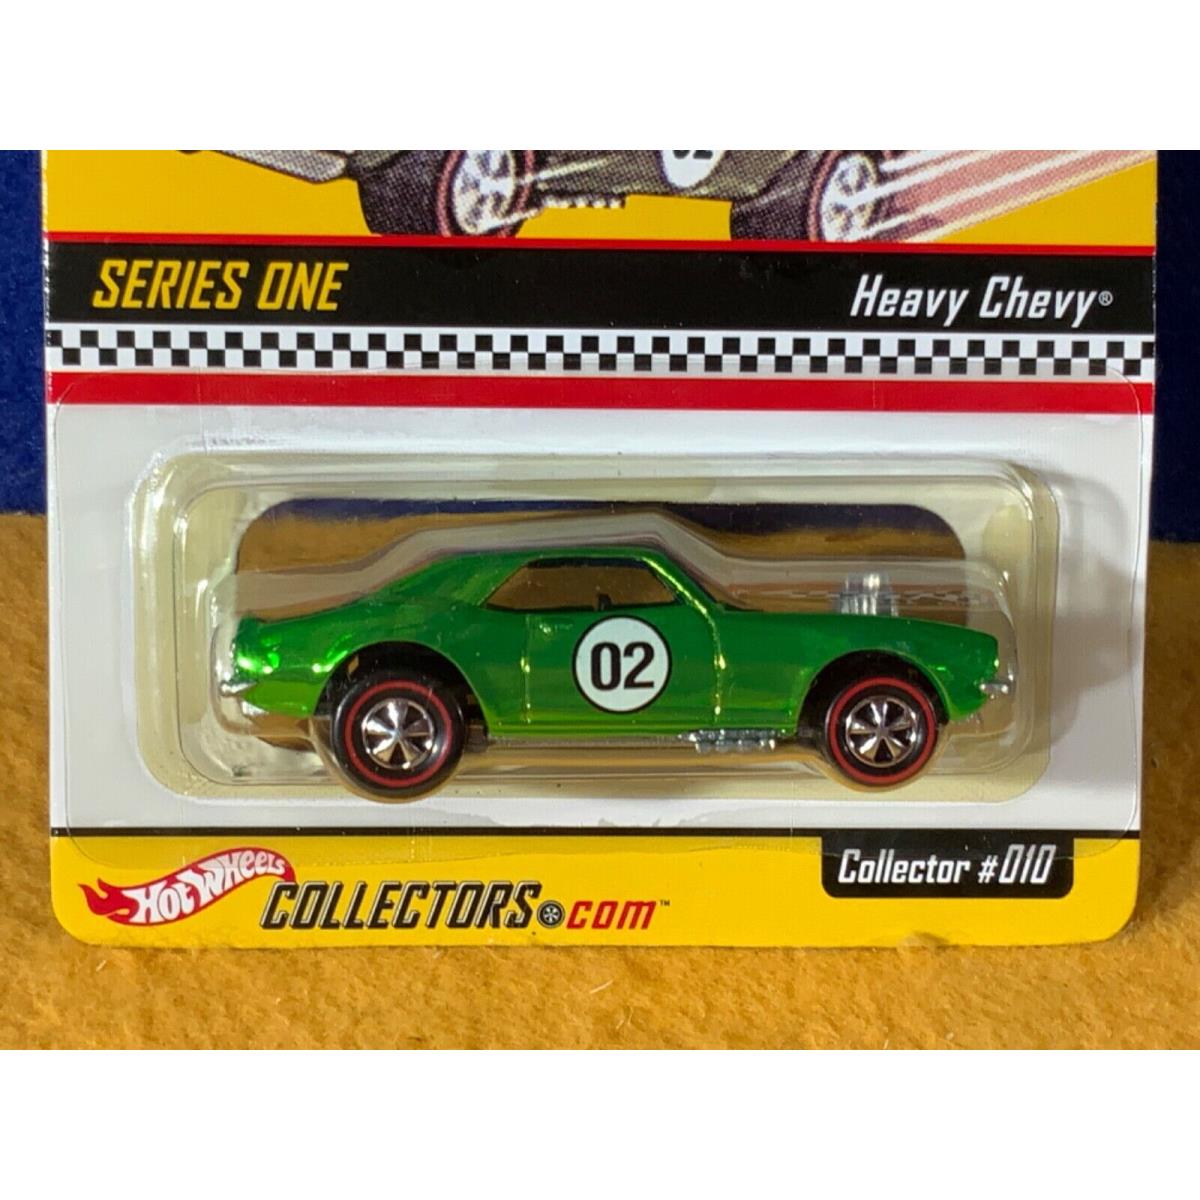 L9-81 Hot Wheels Online Exclusive - Heavy Chevy - Series One - 7852 / 10000